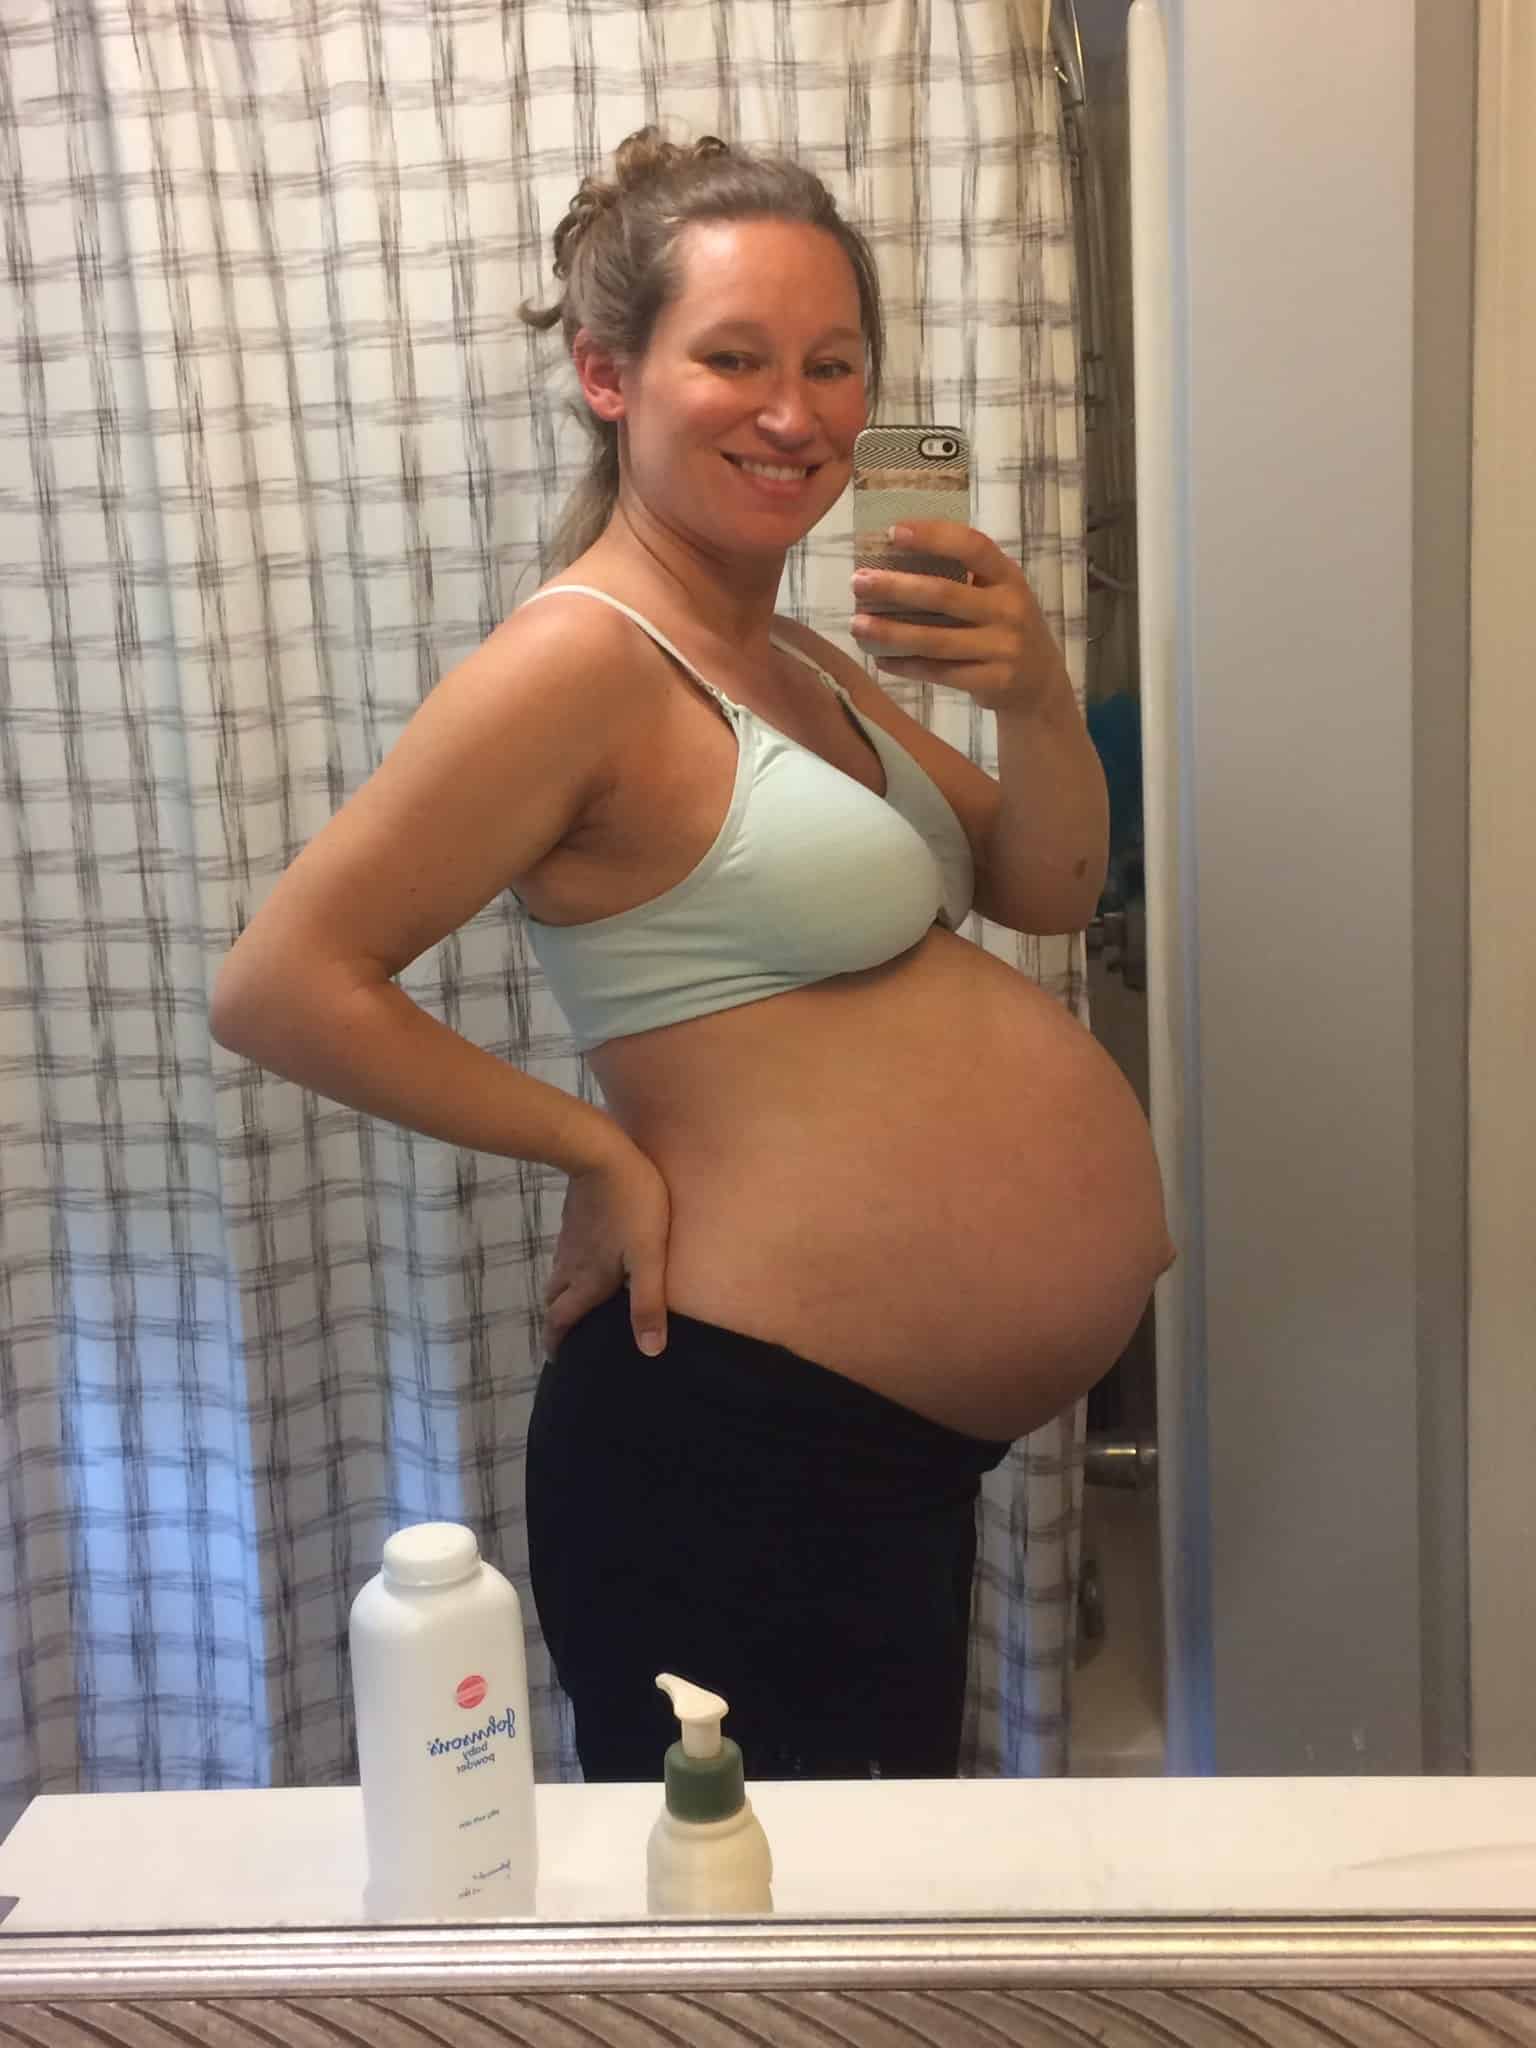 33 Weeks Pregnant with Twins